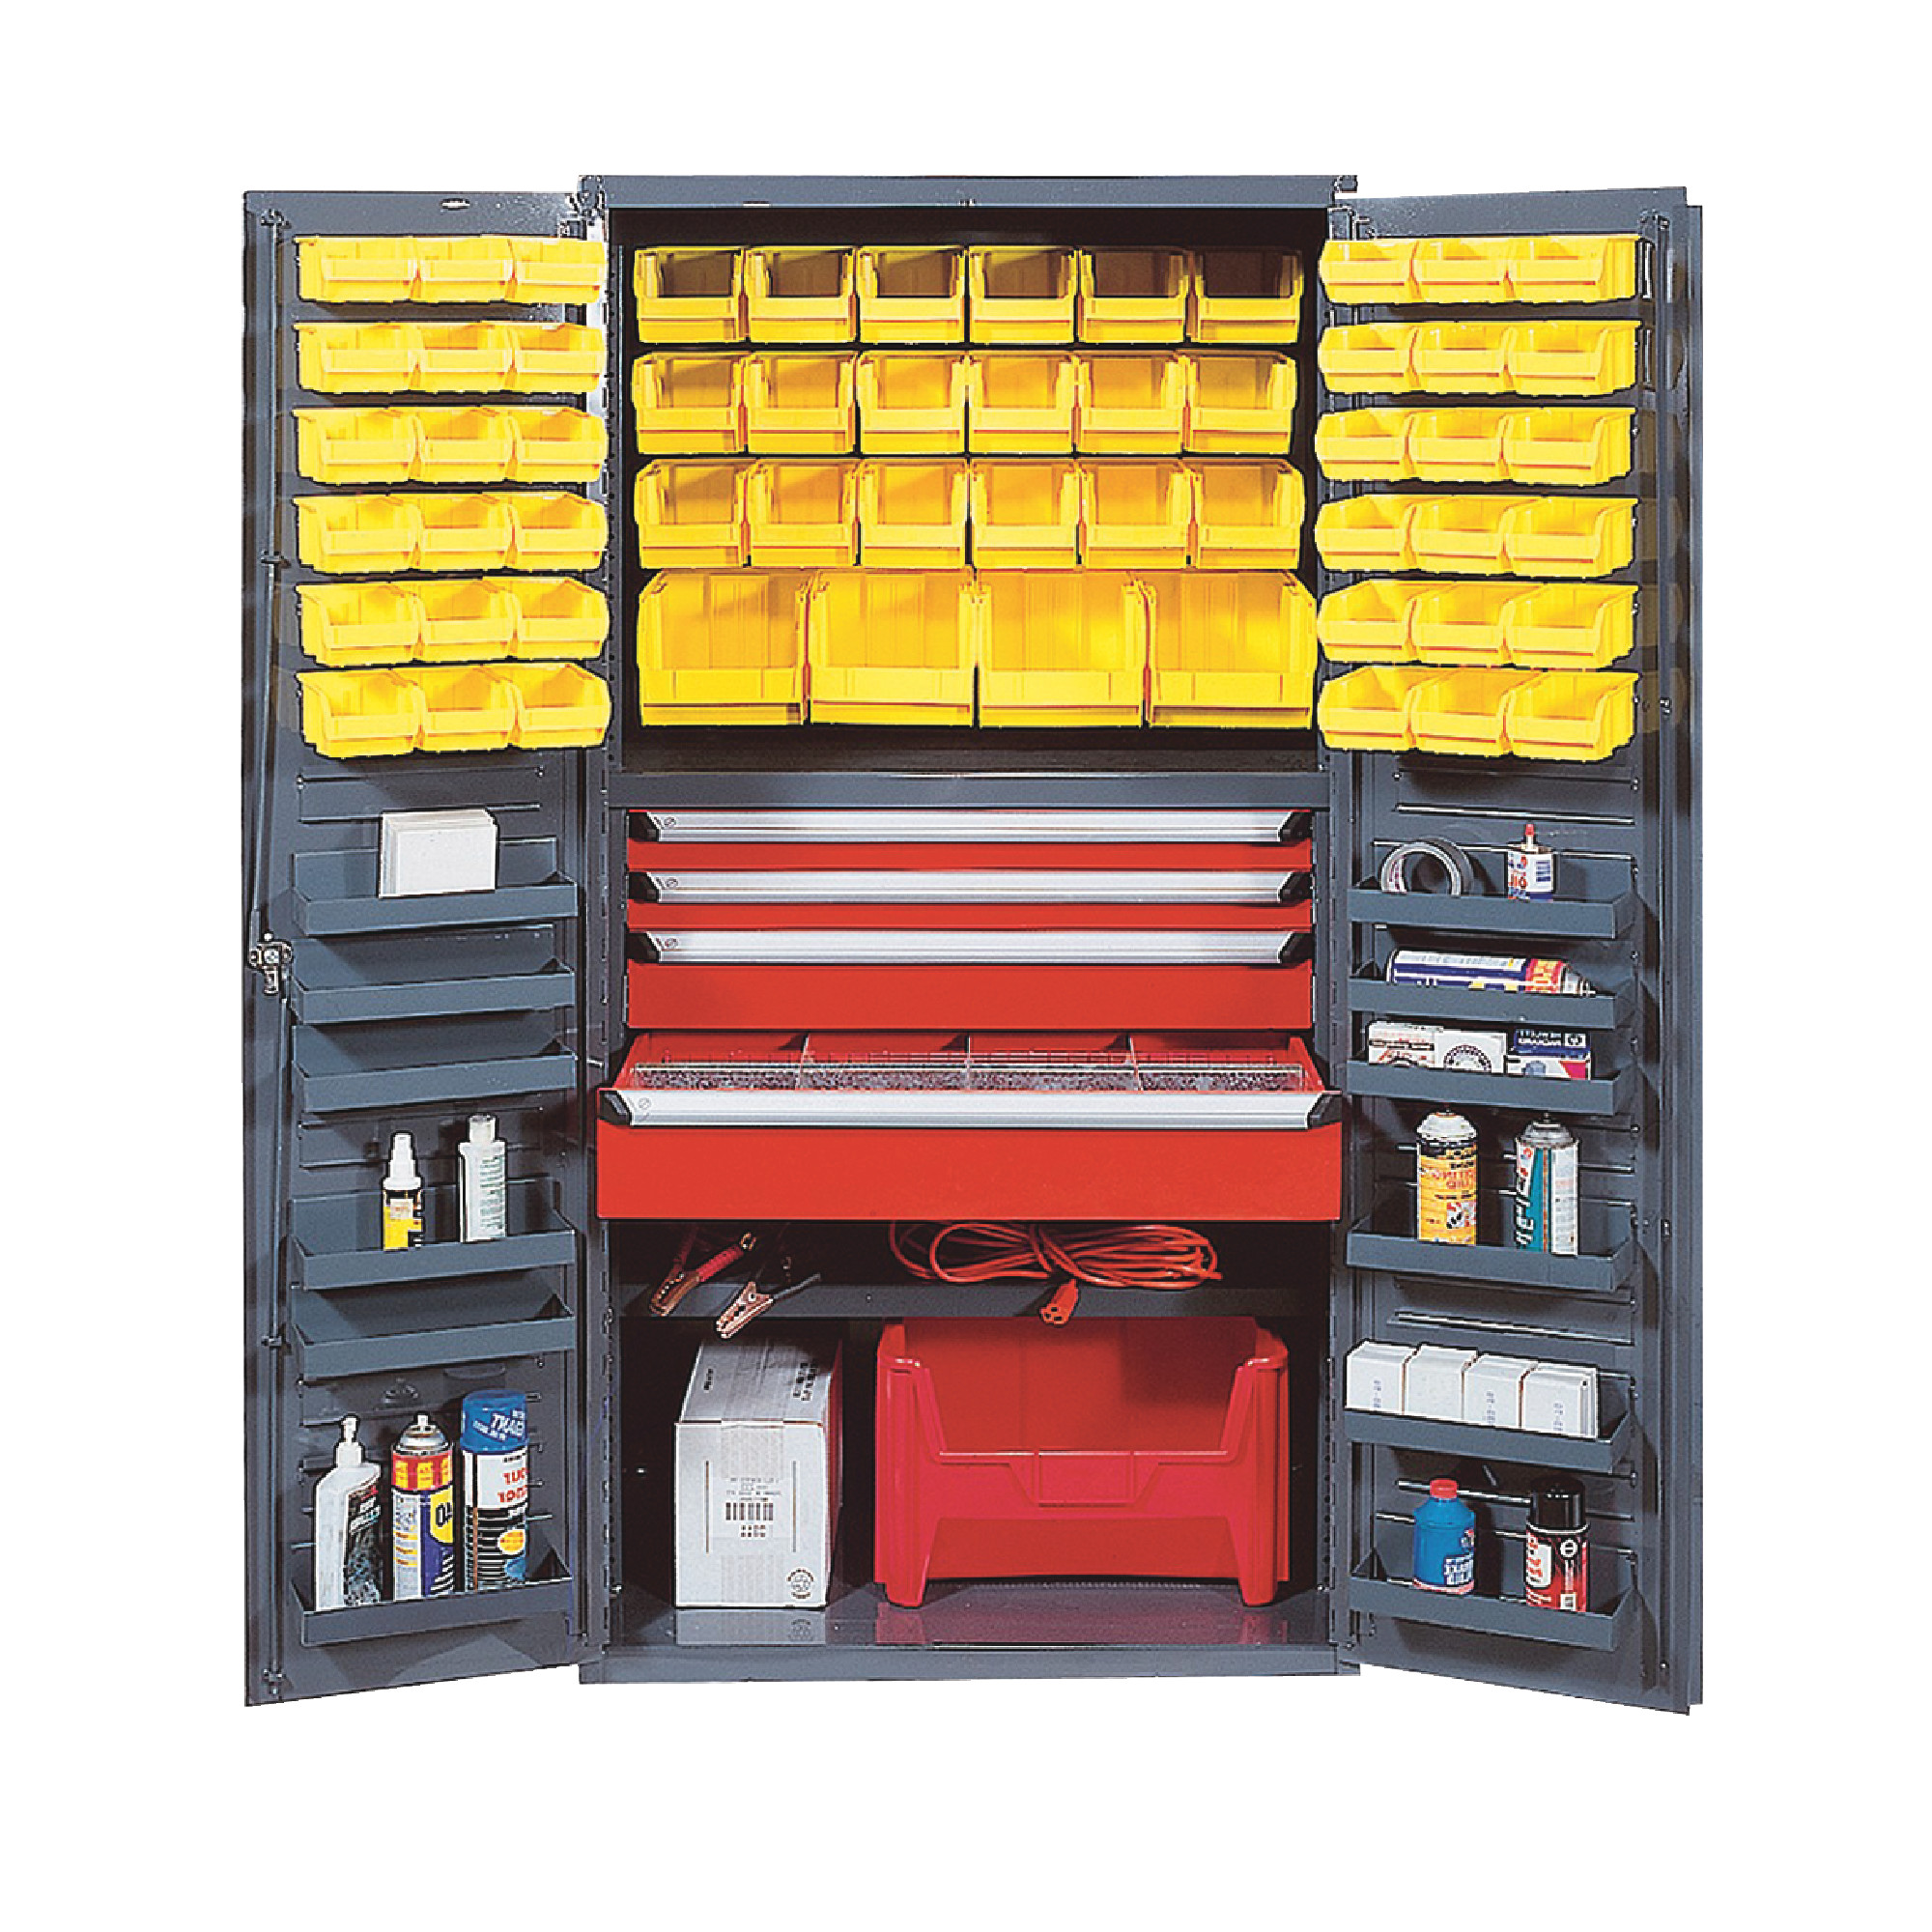 QUANTUM STORAGE SYSTEMS 36" Wide All Welded Floor Cabinet With 58 Yellow Bins